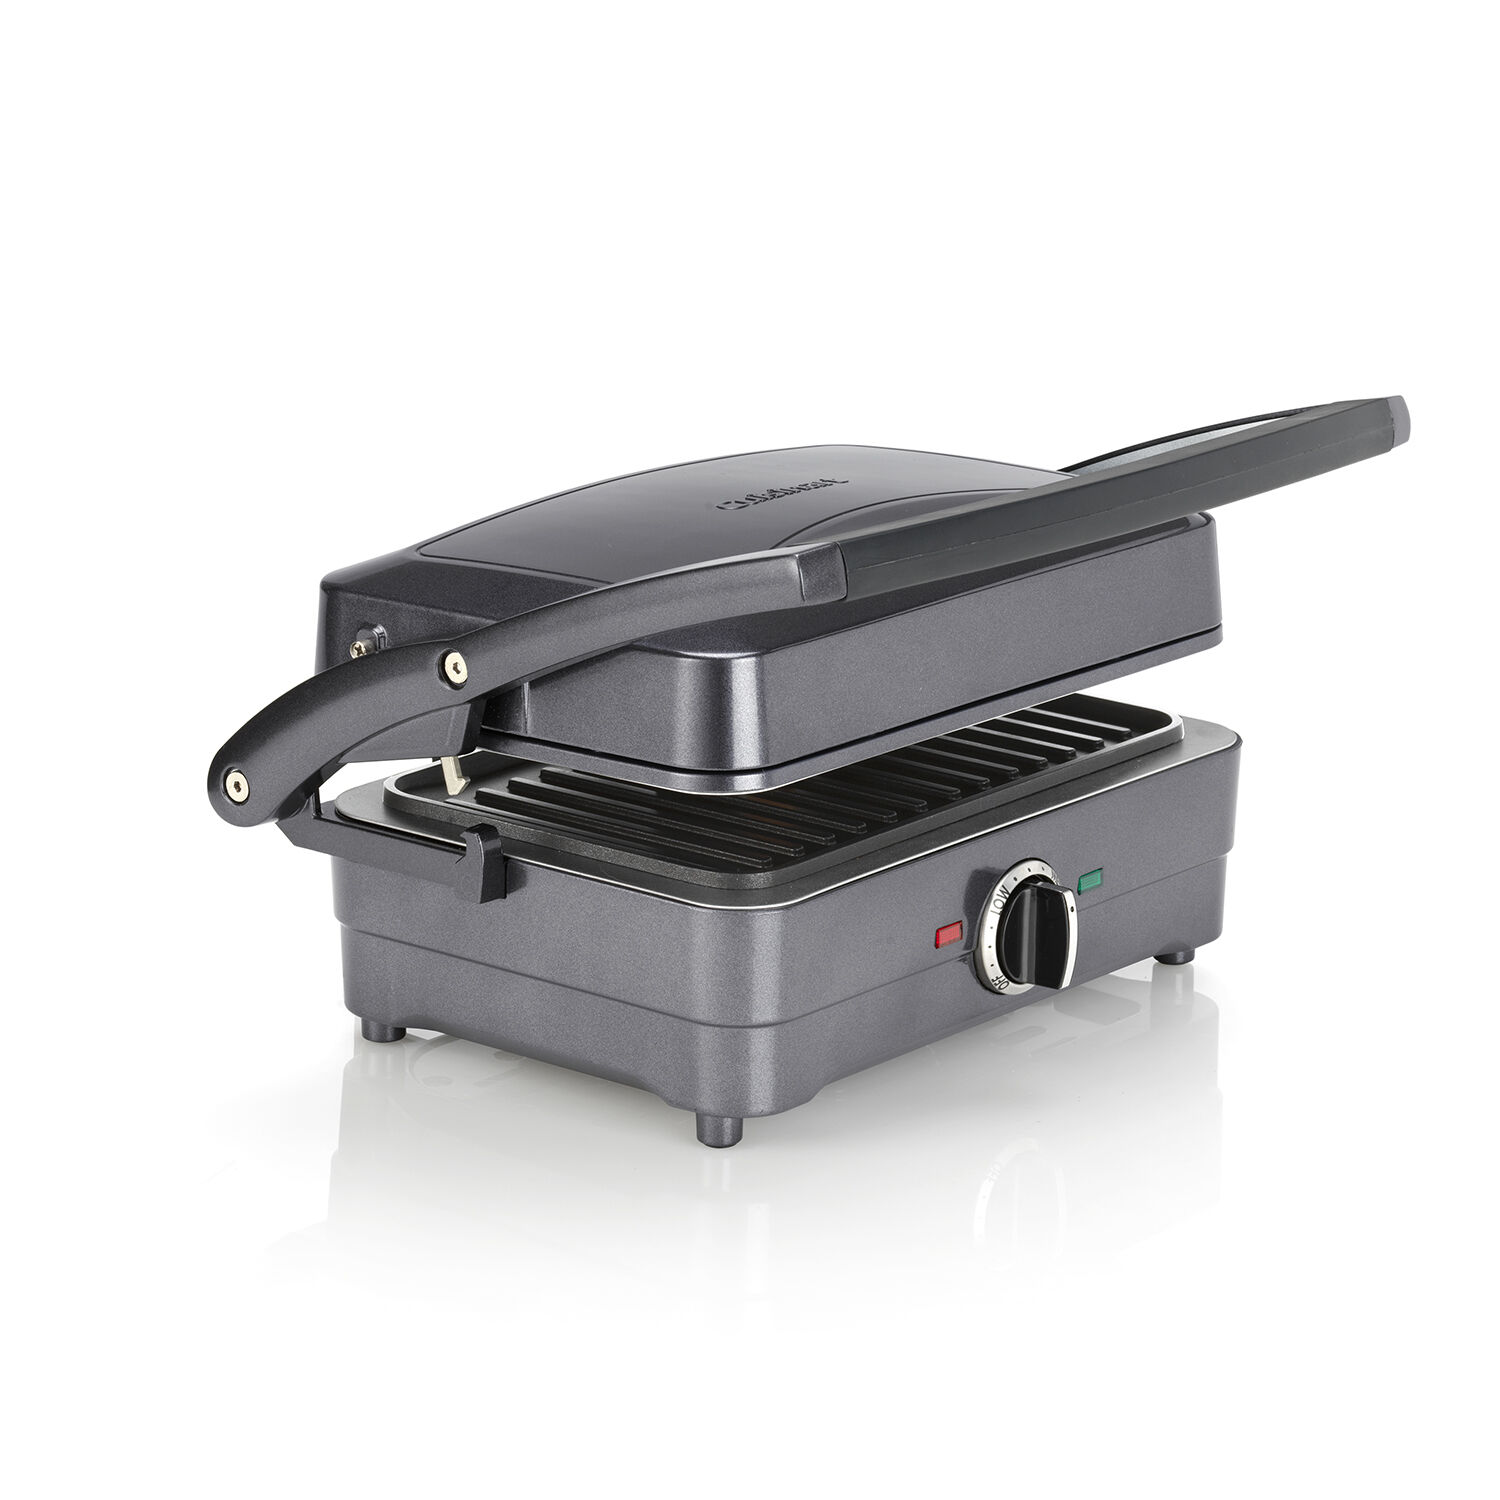 Cuisinart Contact Grill / Waffle Iron / Omelette Maker 3-in-1